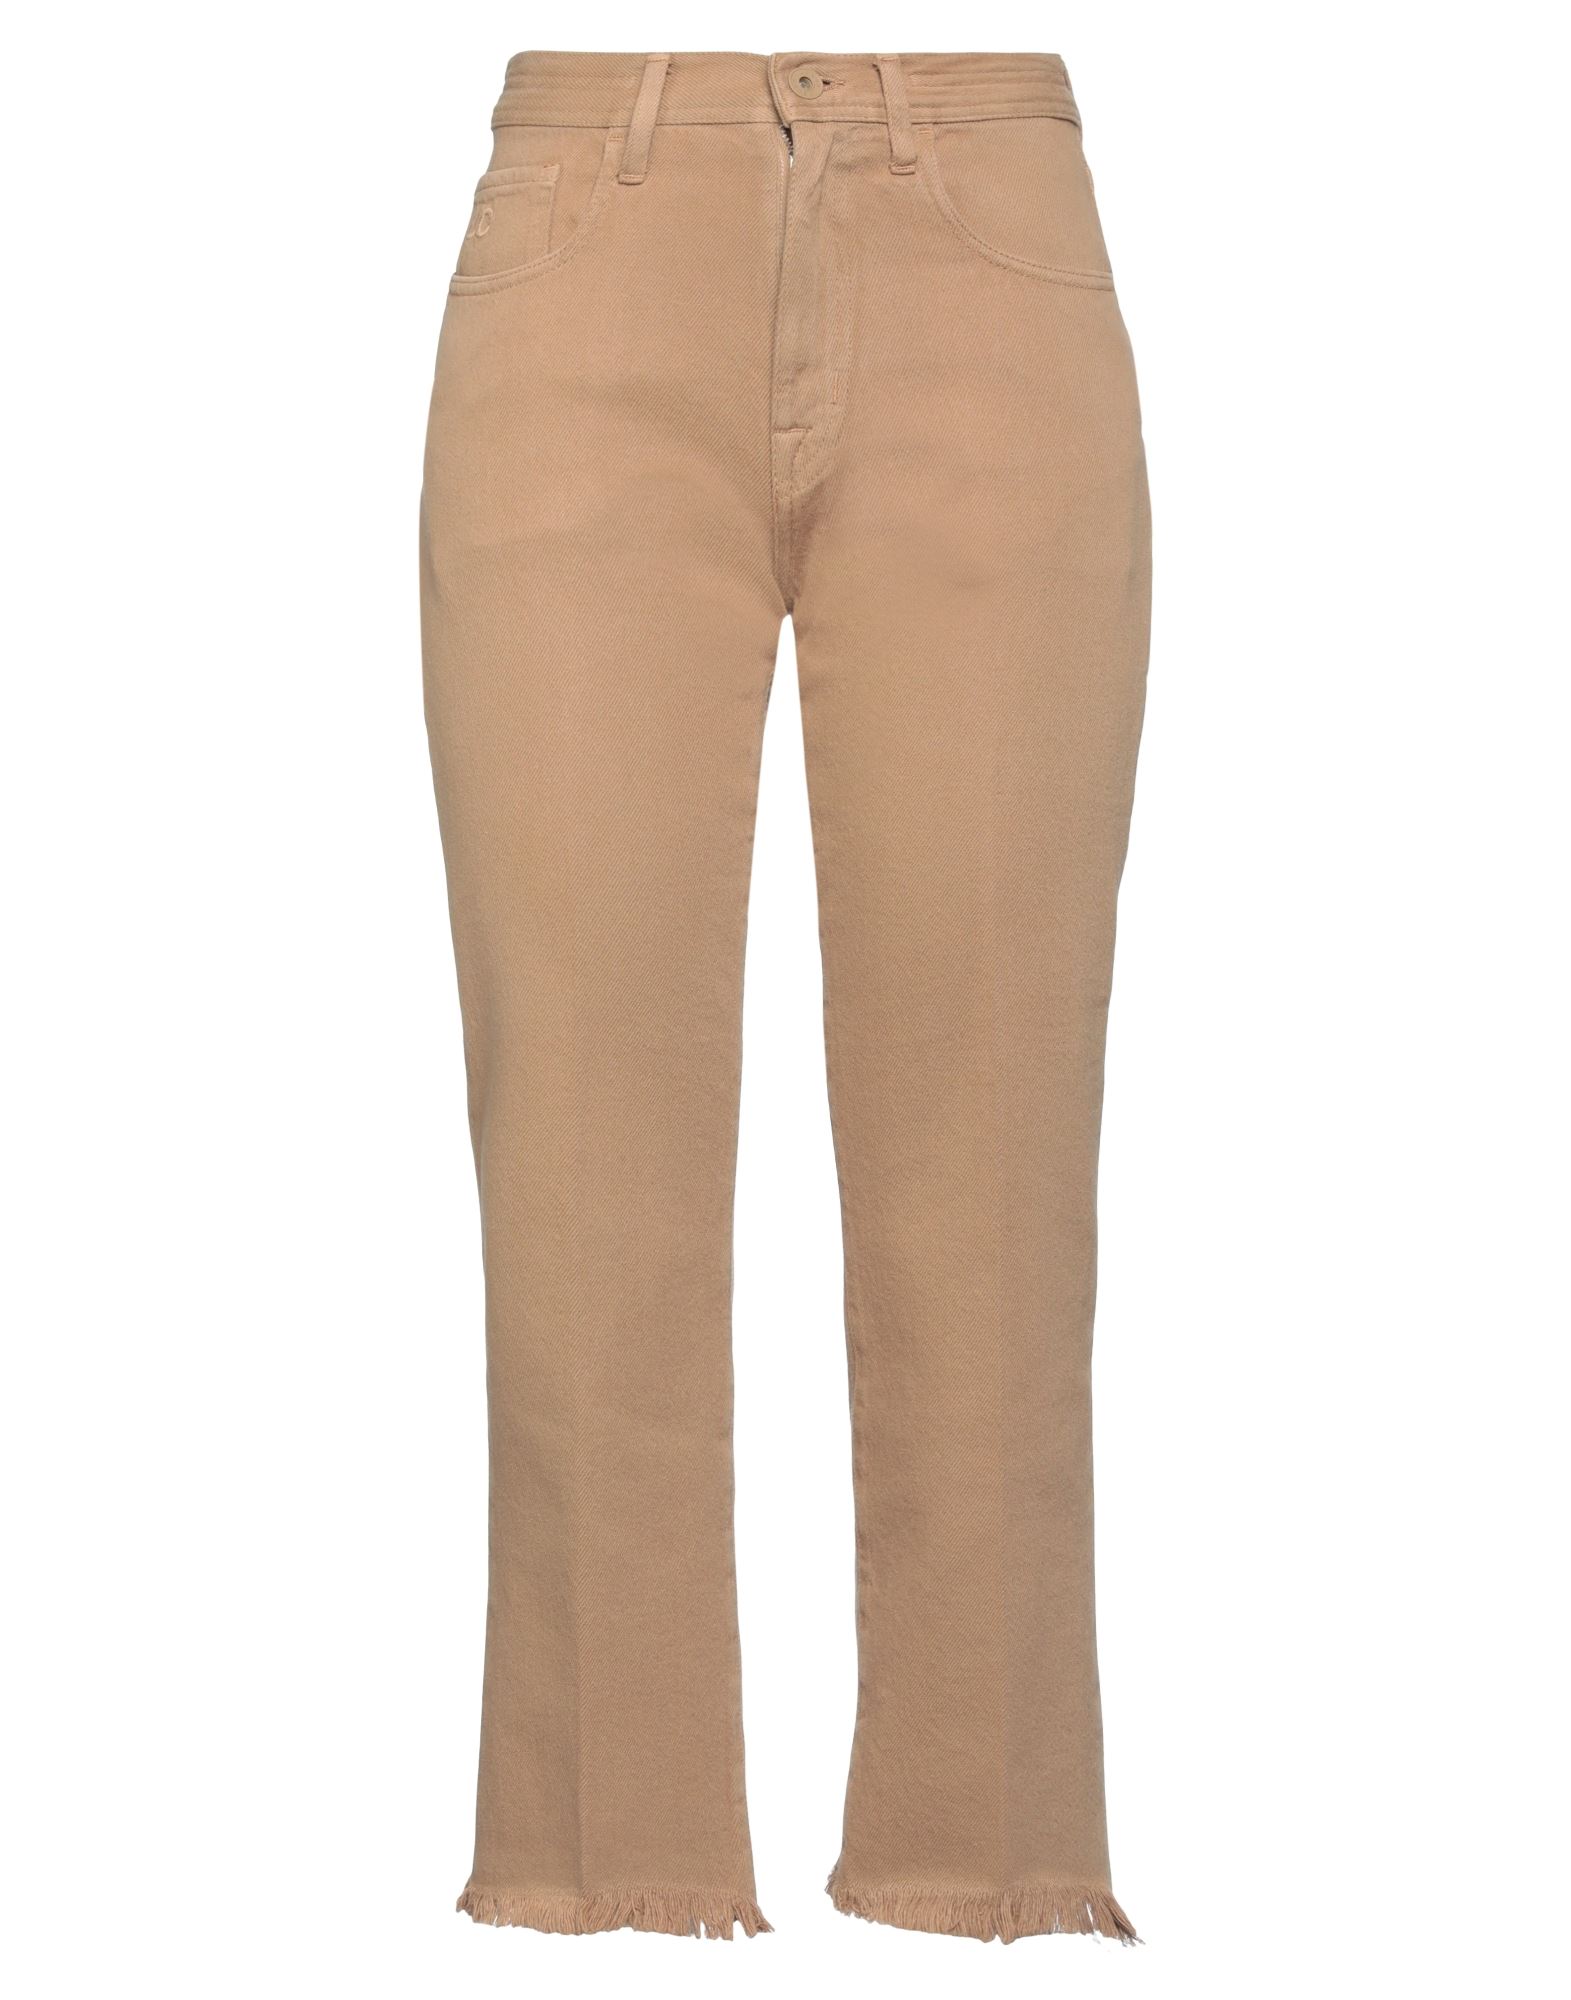 Shop Jacob Cohёn Woman Jeans Camel Size 24 Cotton, Polyester In Beige